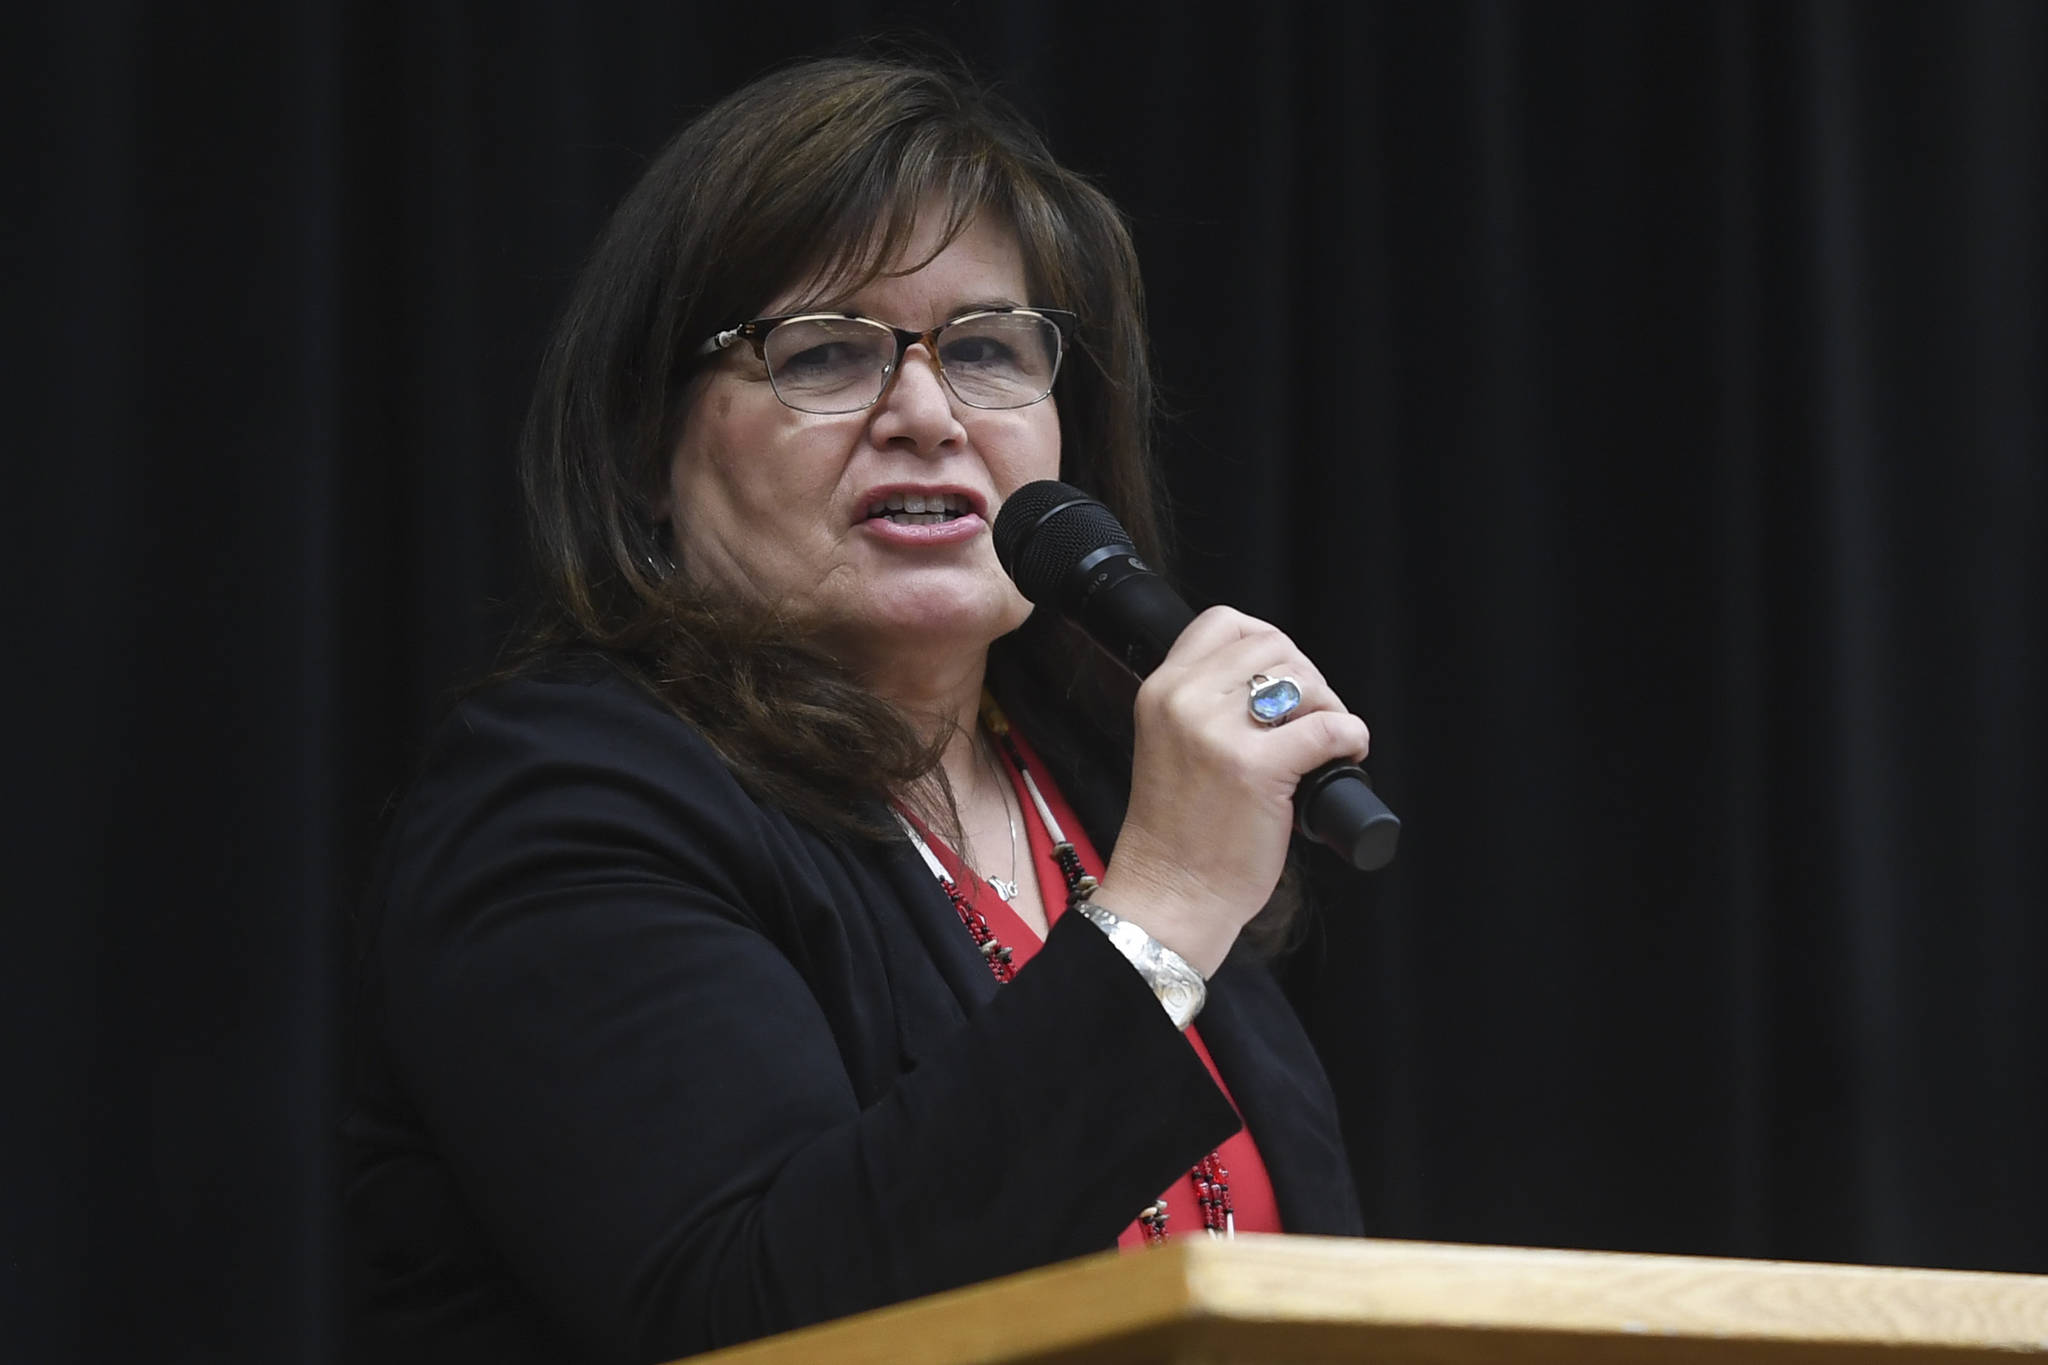 Jackie Pata, President and CEO of the Tlingit-Haida Regional Housing Authority, speaks during Indigenous Peoples’ Day at the Elizabeth Peratrovich Hall on Monday, Oct. 14, 2019. (Michael Penn | Juneau Empire)